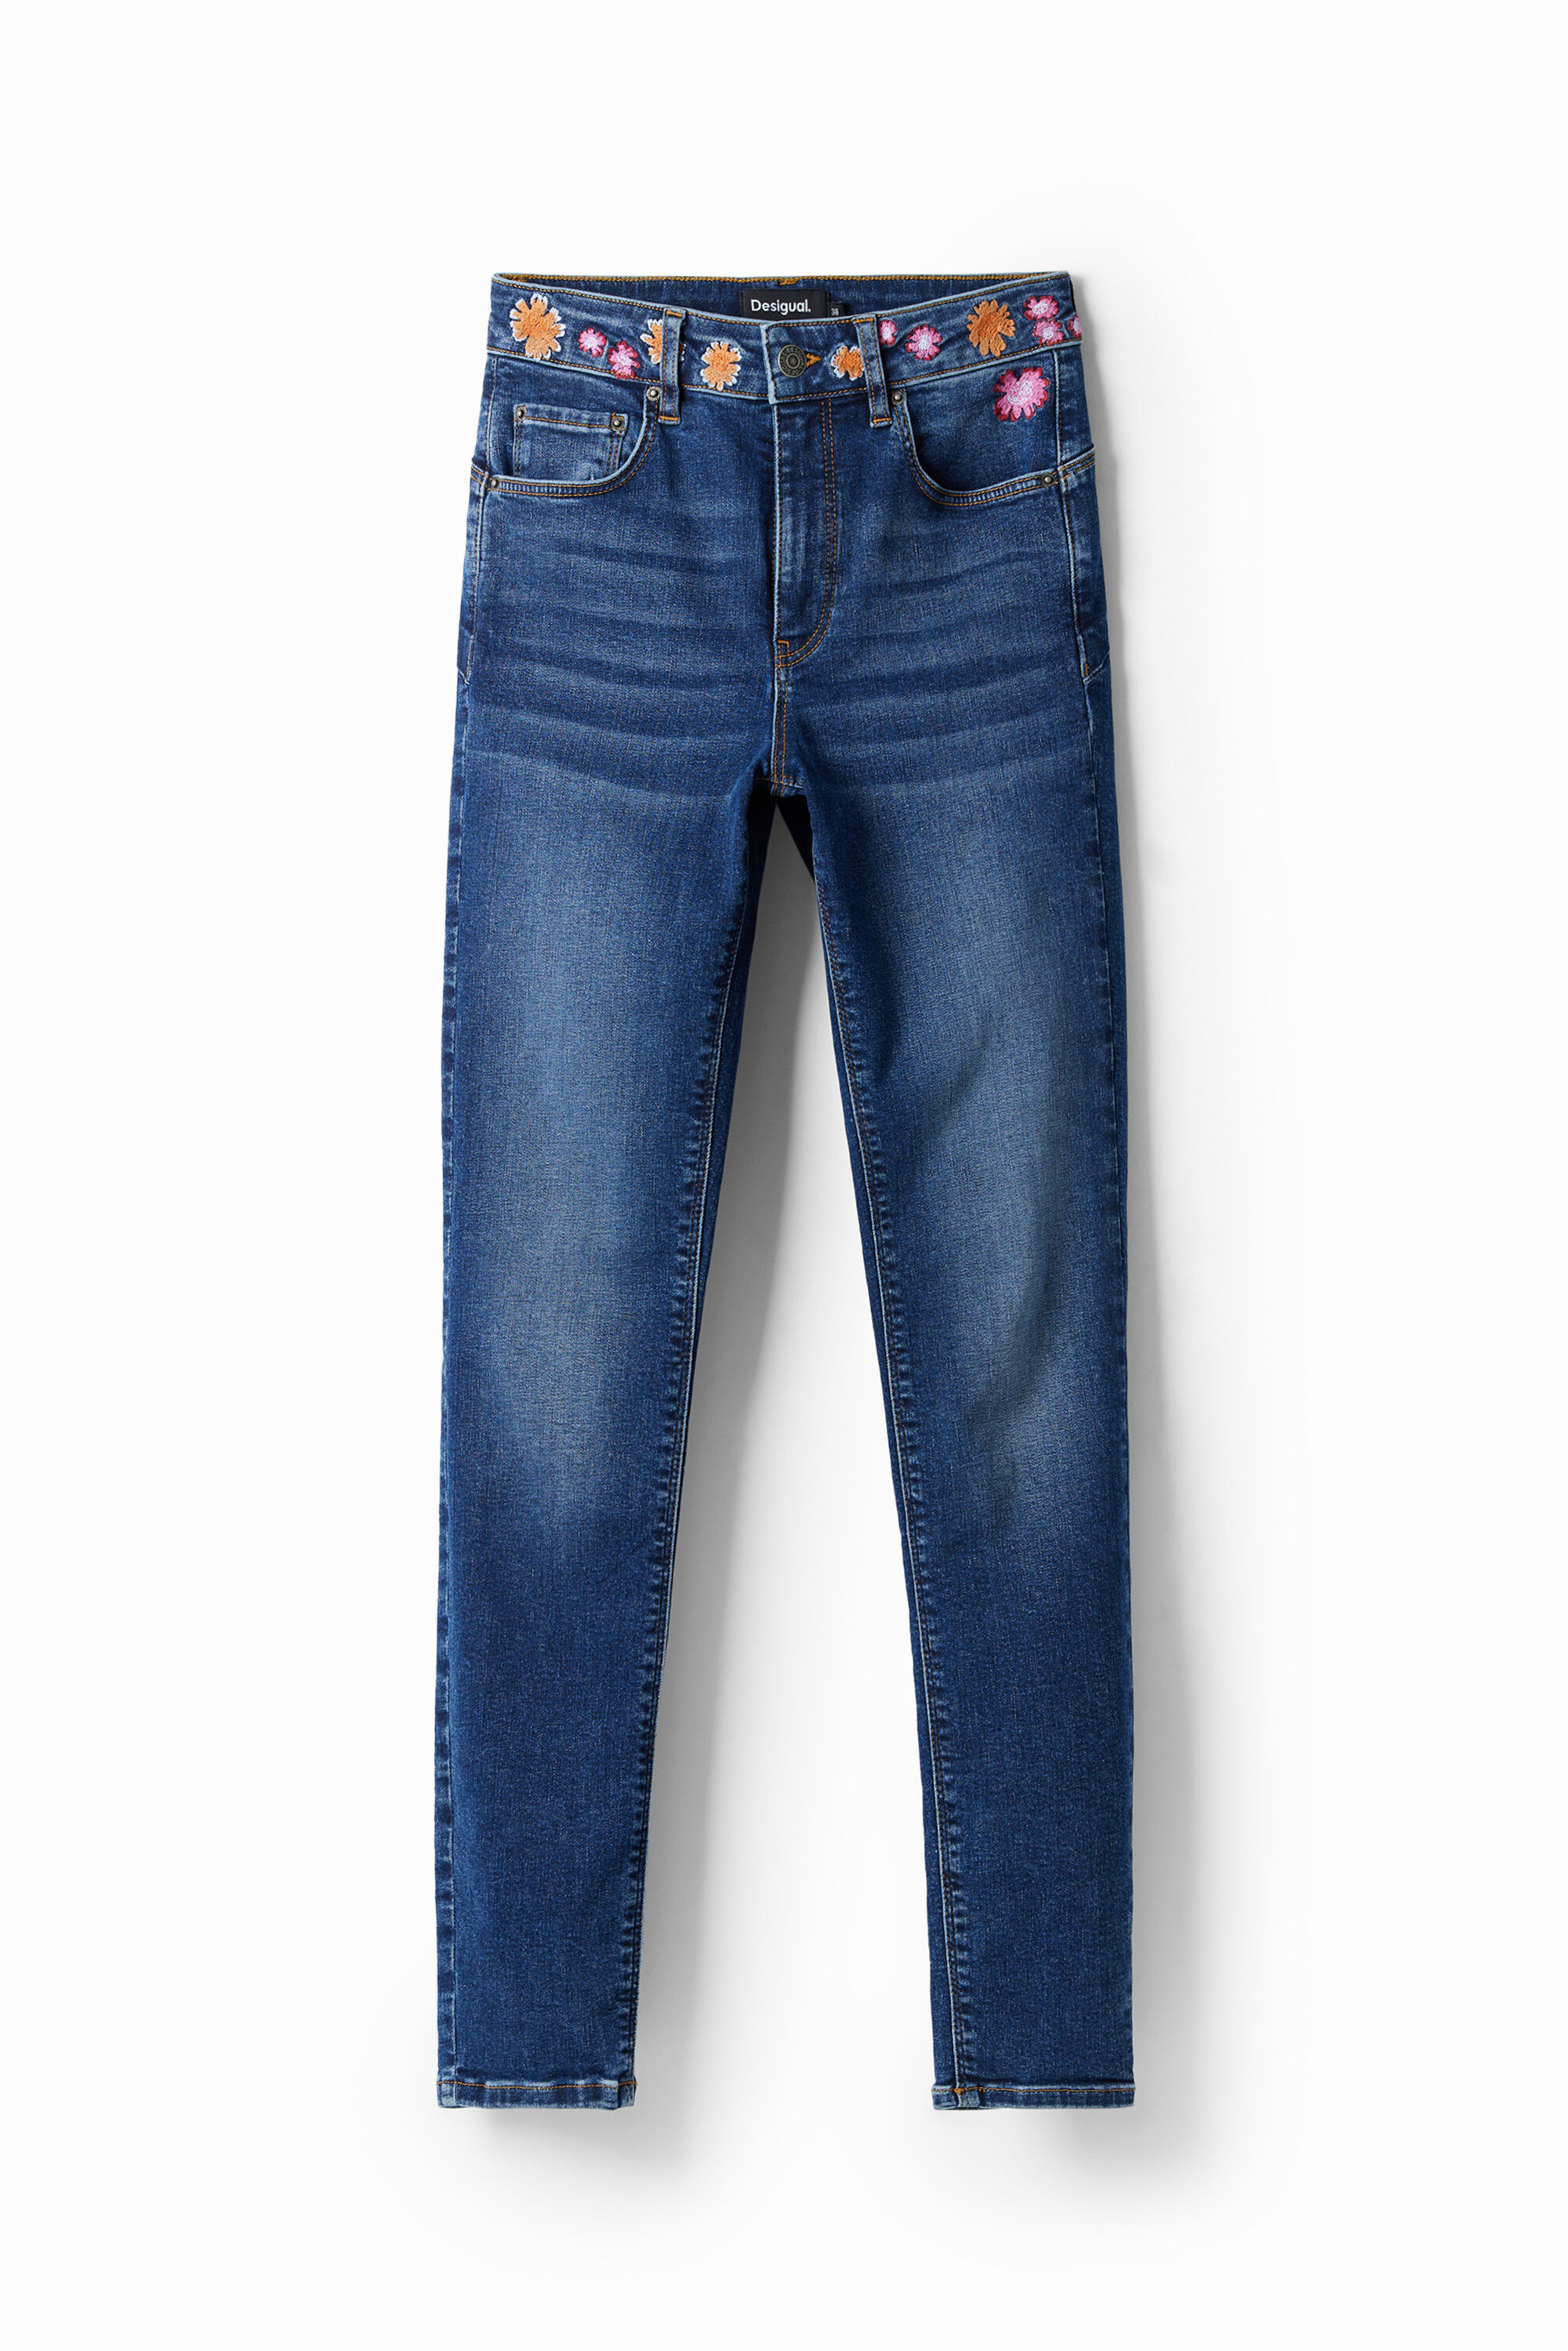 Desigual Embroidered Floral Jeans In Blue